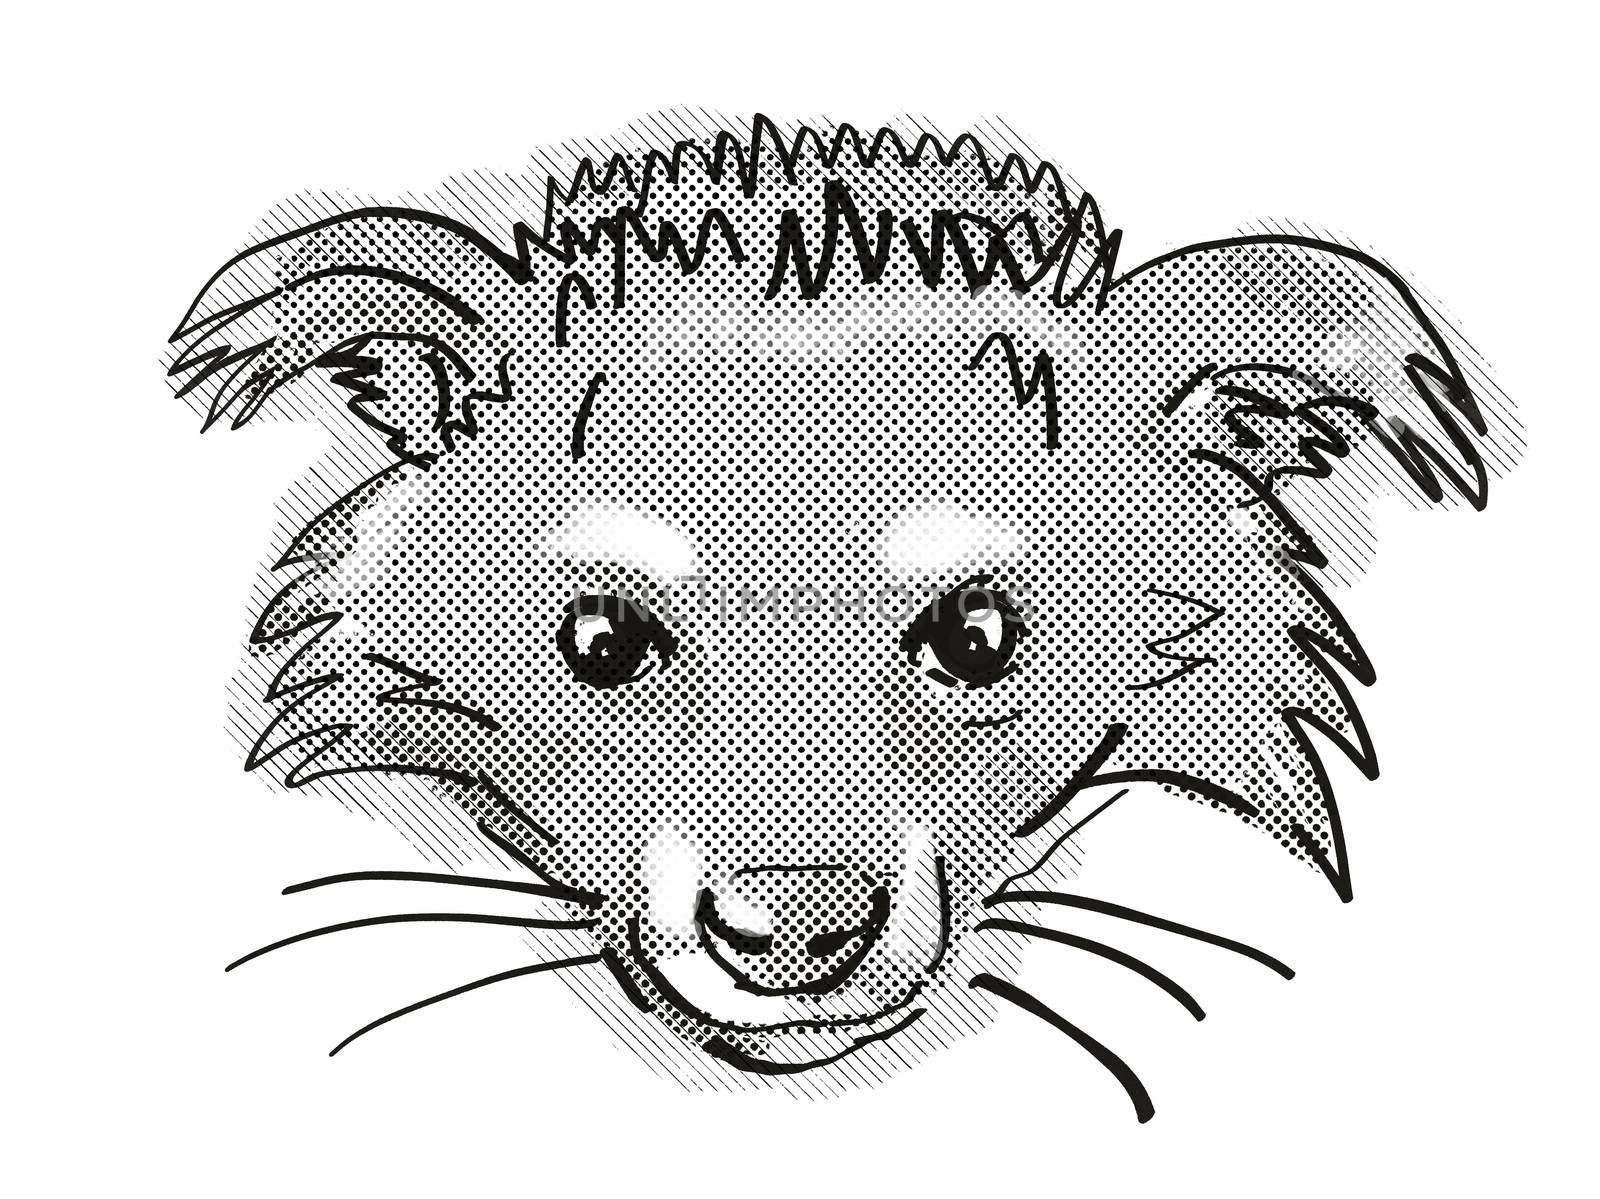 Retro cartoon style drawing of head of a Binturong or Arctictis binturong, an endangered wildlife species on isolated white background done in black and white.